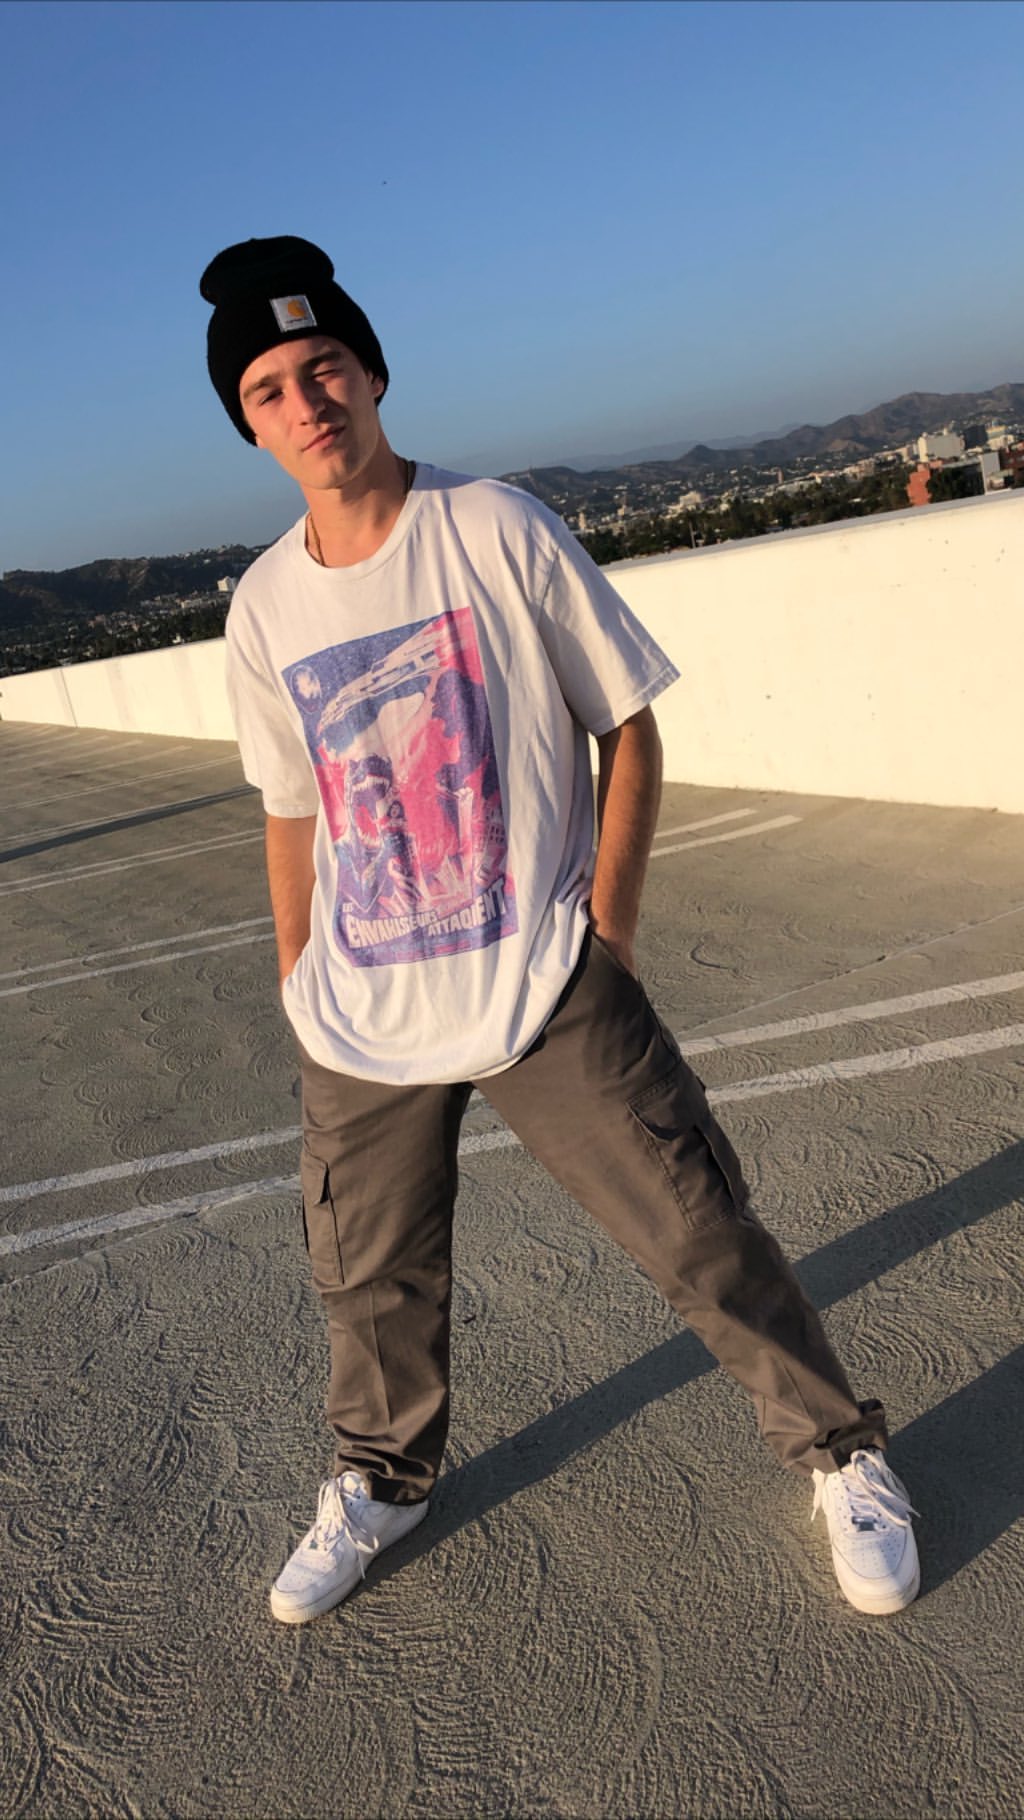 General photo of Dylan Summerall